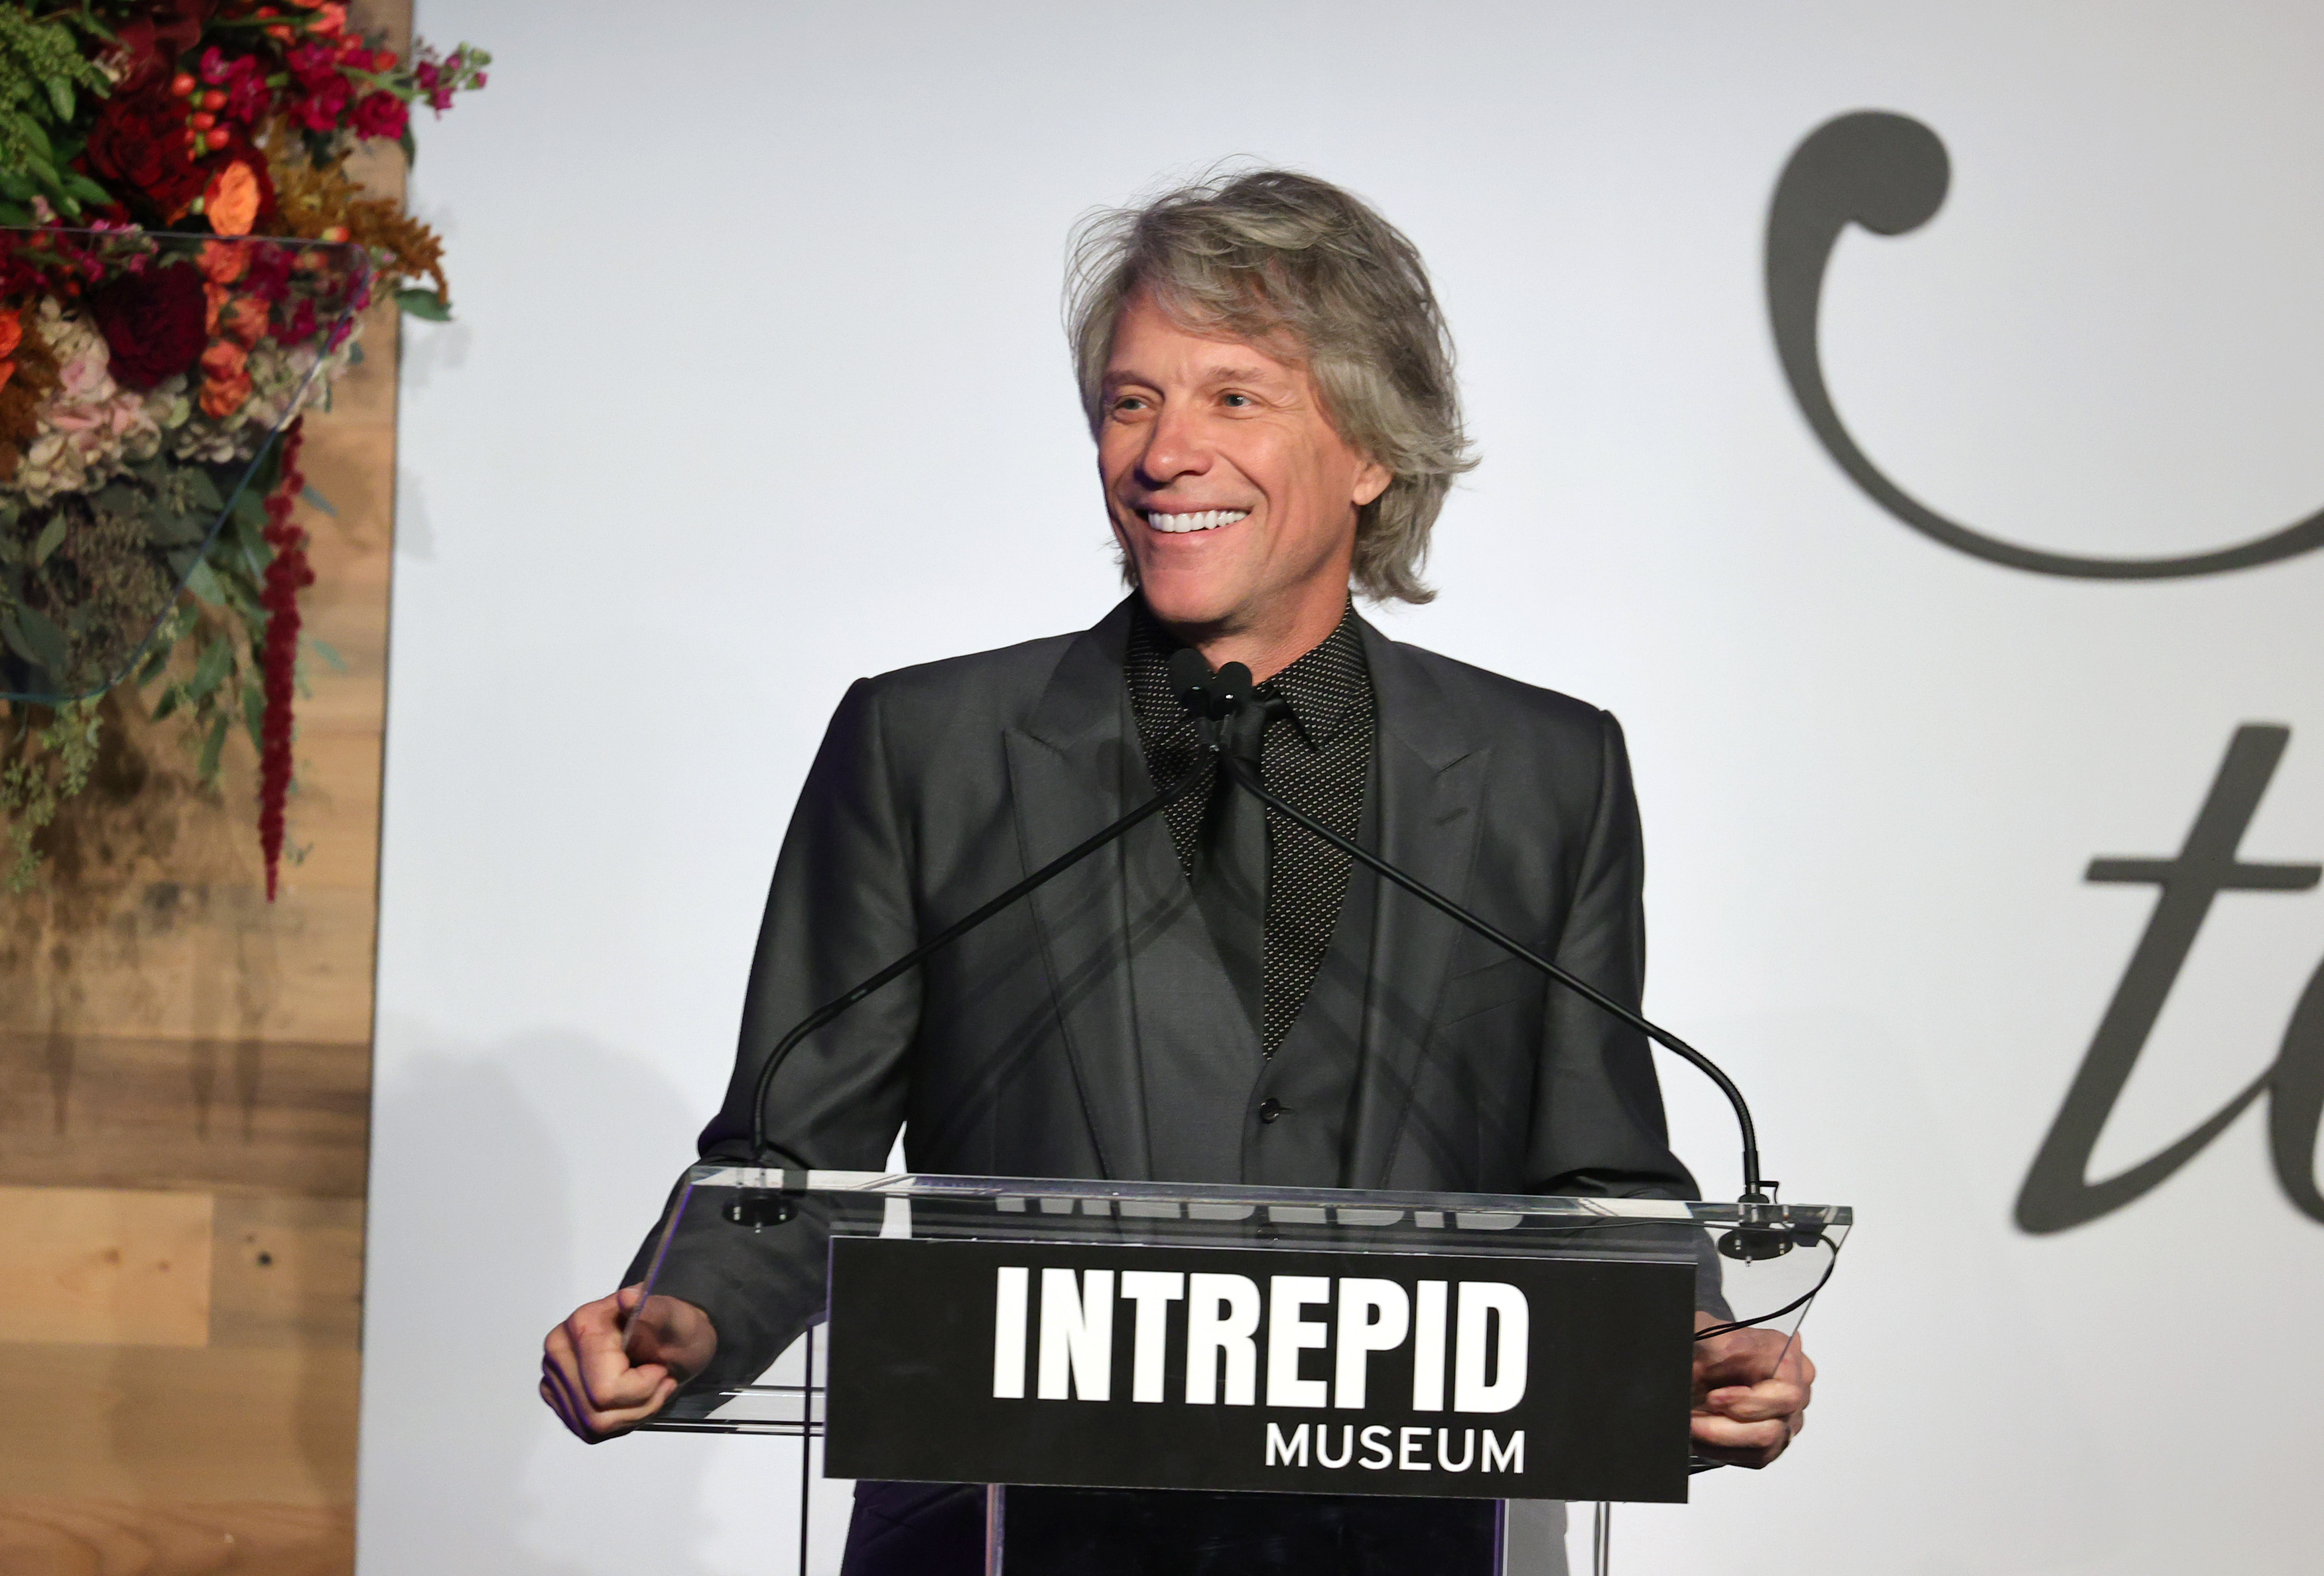 Jon Bon Jovi, who recently sold his Greenwich Village condo, speaking at the Intrepid Museum Annual Salute To Freedom Gala